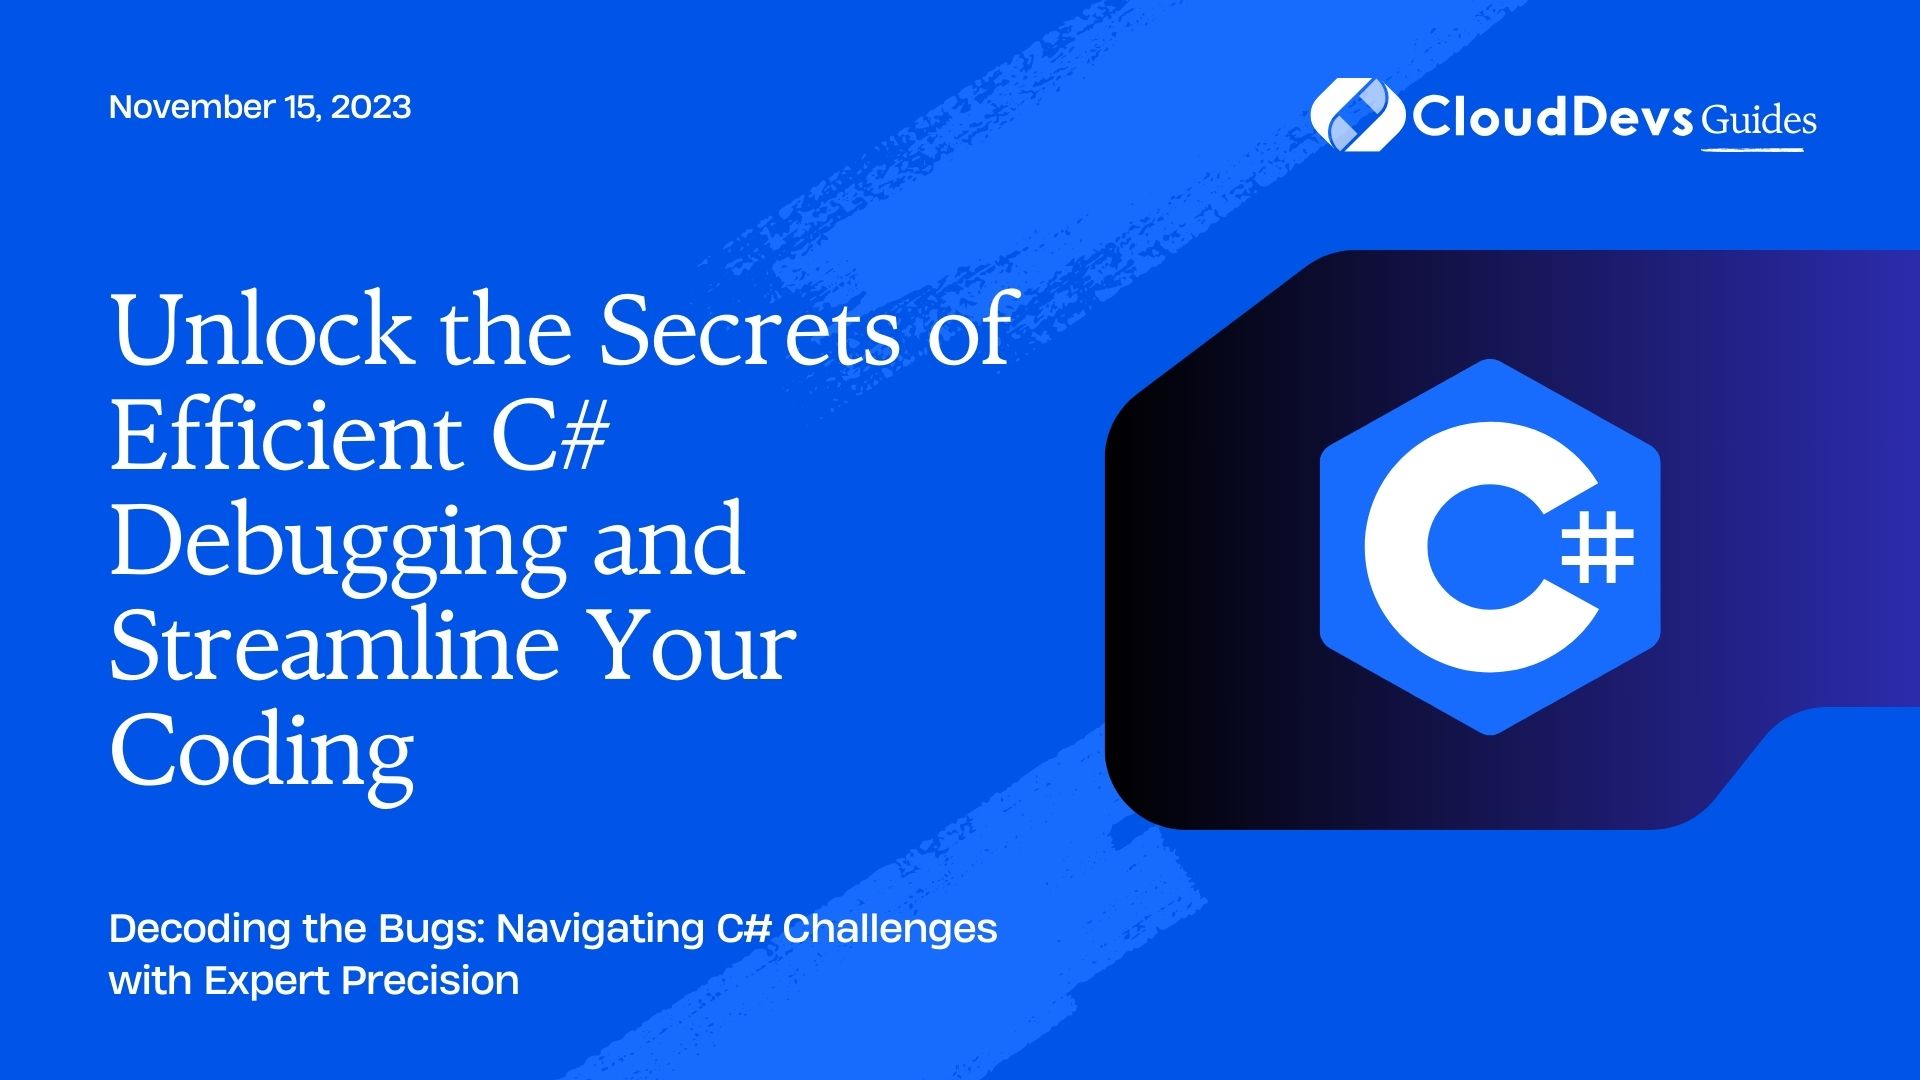 Unlock the Secrets of Efficient C# Debugging and Streamline Your Coding